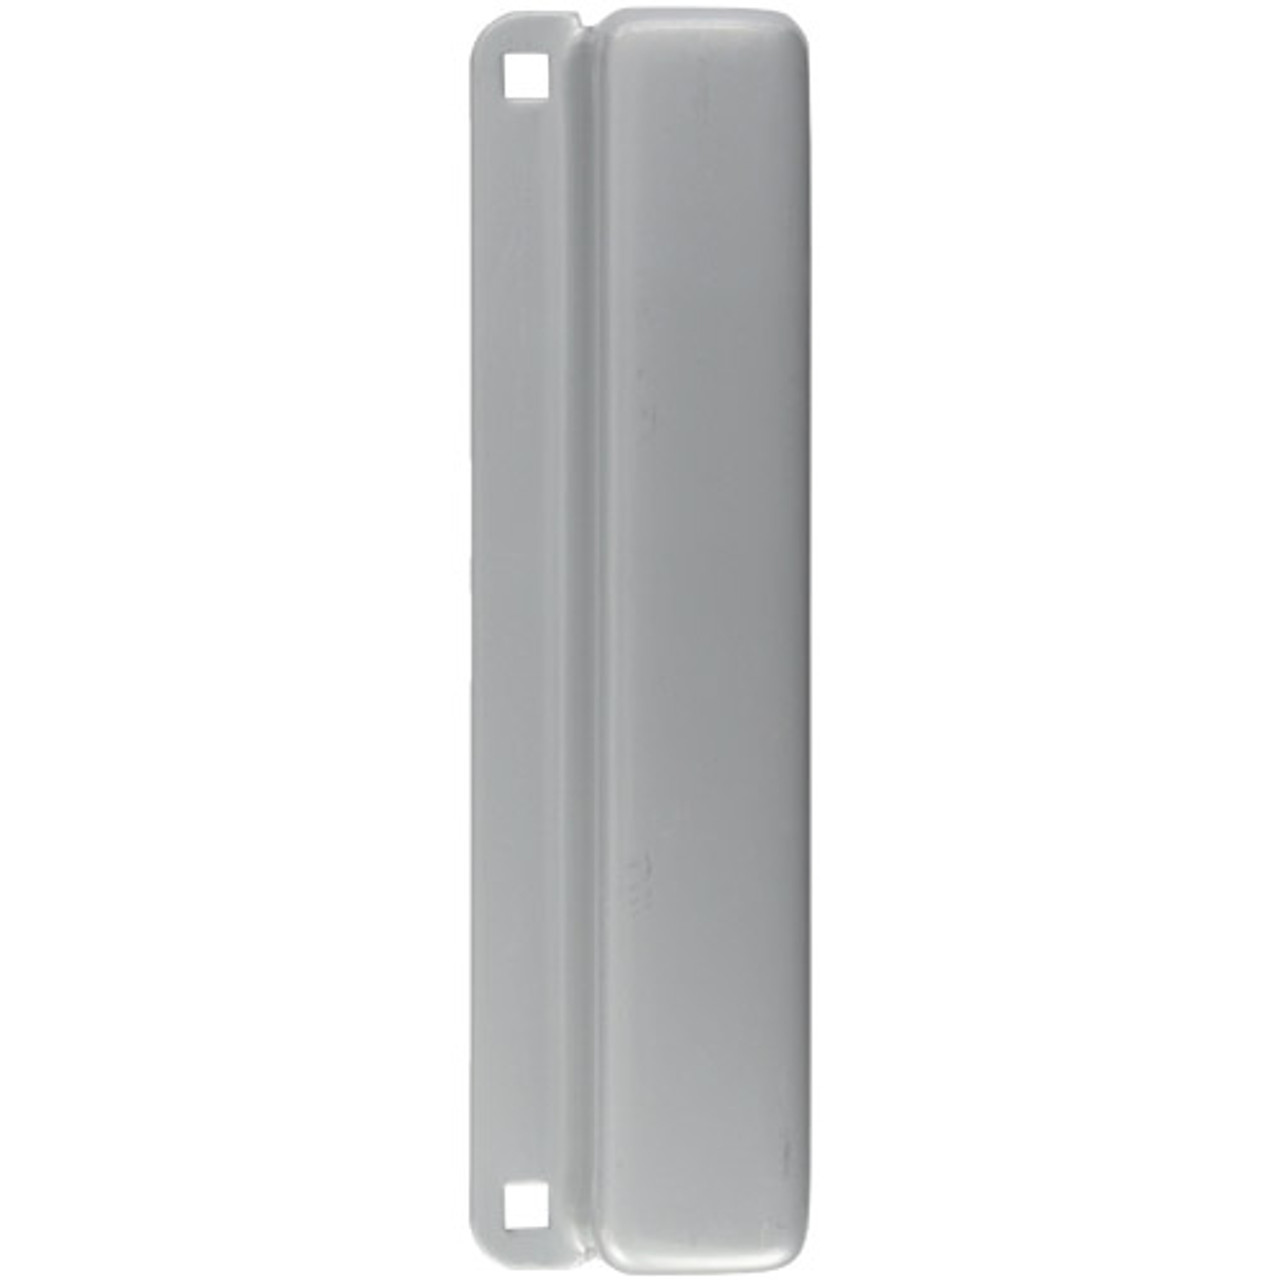 MELP-210-EBF-SL Don Jo Latch Protector for Electric Strikes in Silver Coated Finish